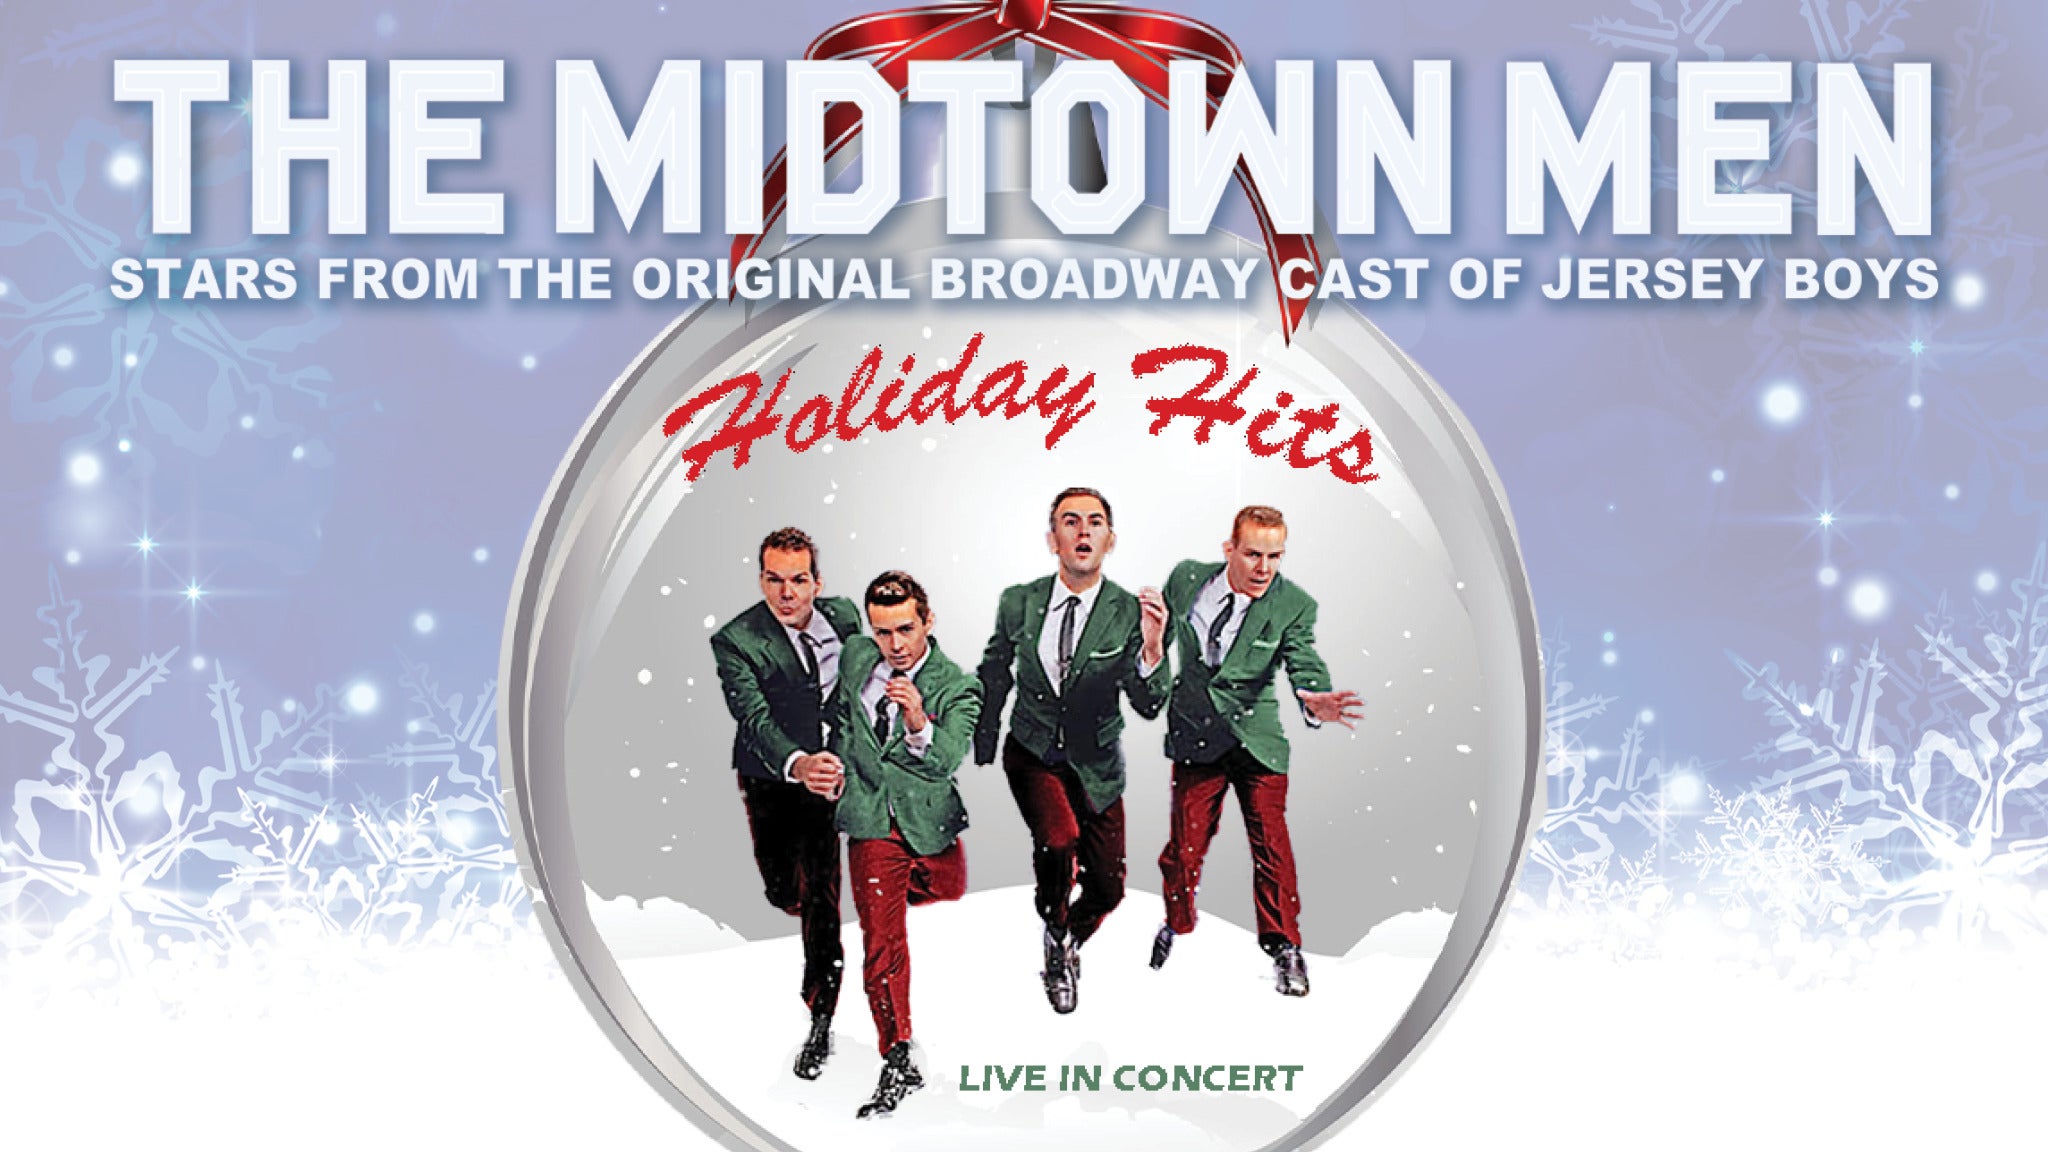 The Midtown Men: Stars From The Original Broadway Show Jersey Boys! in Atlantic City promo photo for Exclusive presale offer code